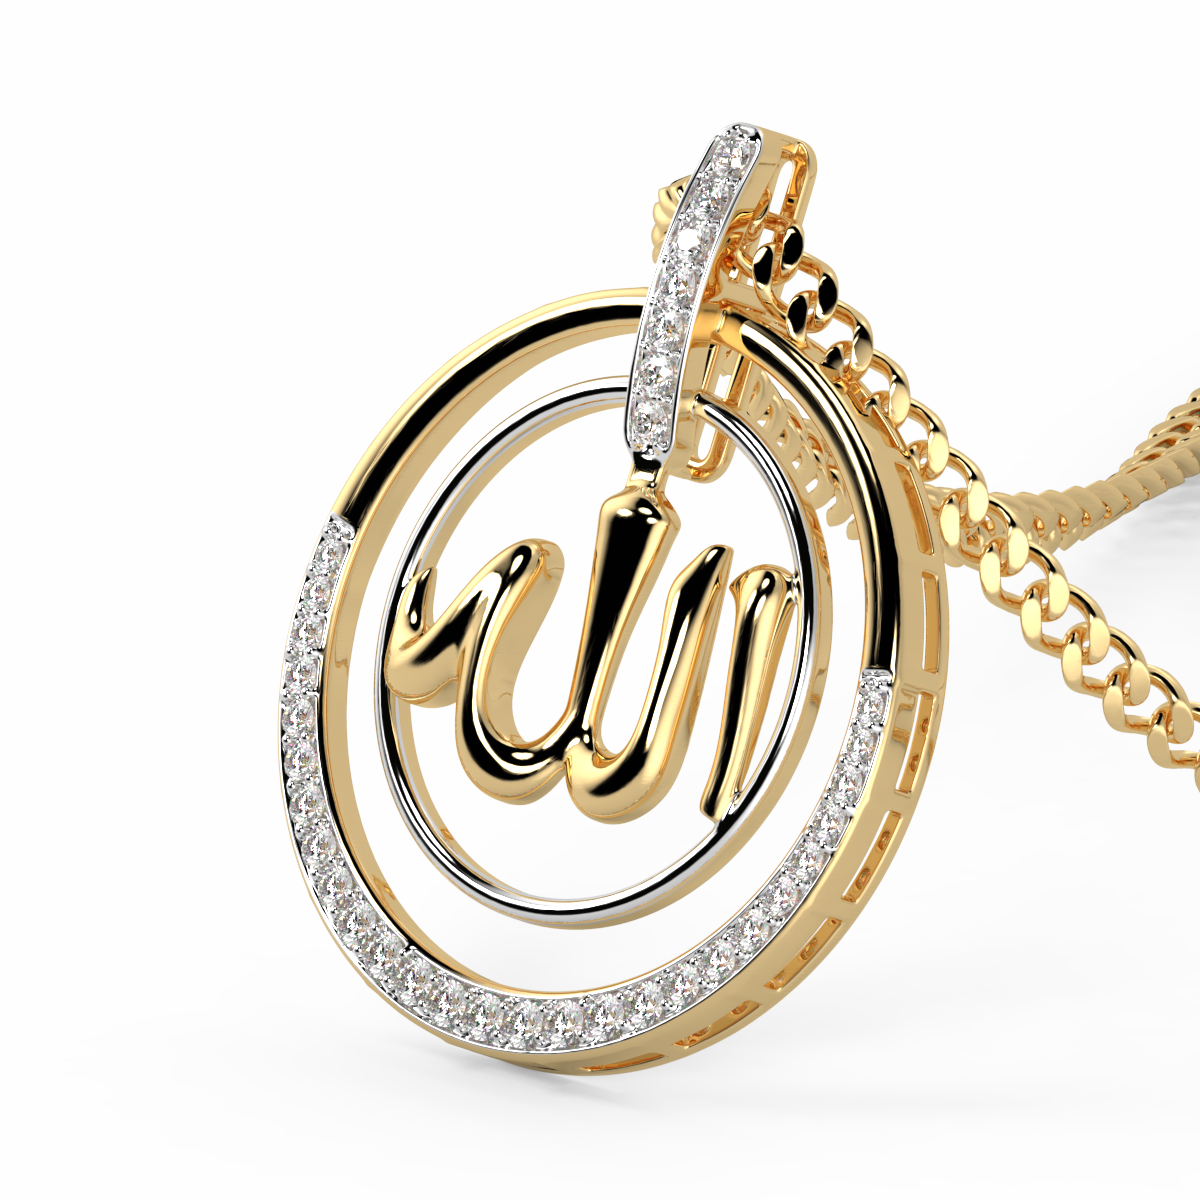 The Divine Locket (Gold Plated 925 Sterling Silver)